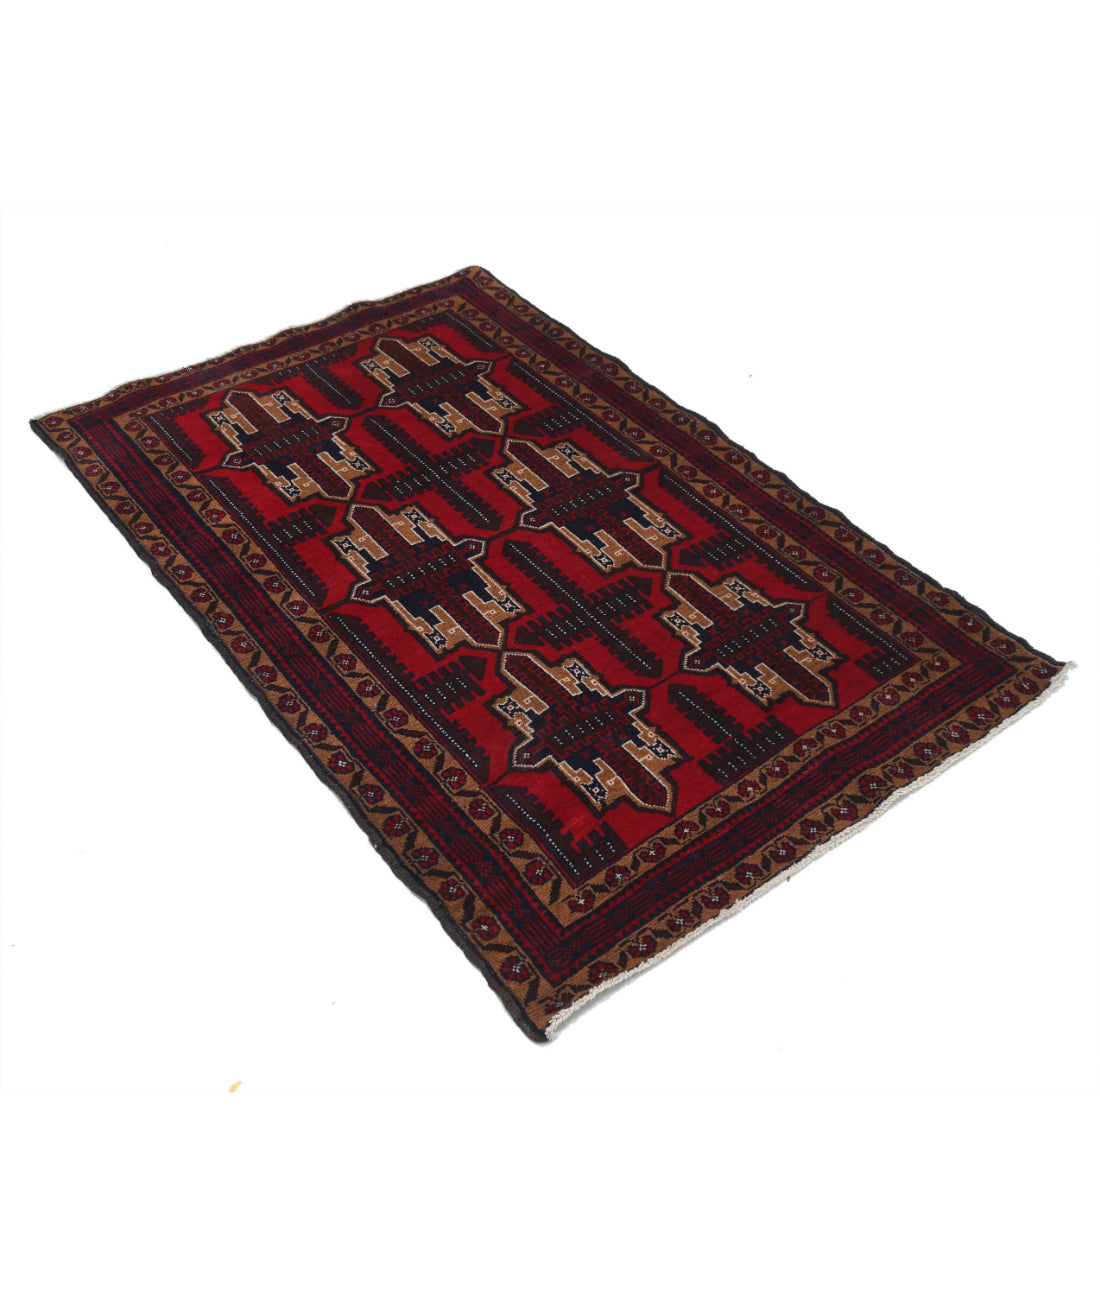 Baluch 3'2'' X 4'11'' Hand-Knotted Wool Rug 3'2'' x 4'11'' (95 X 148) / Red / N/A